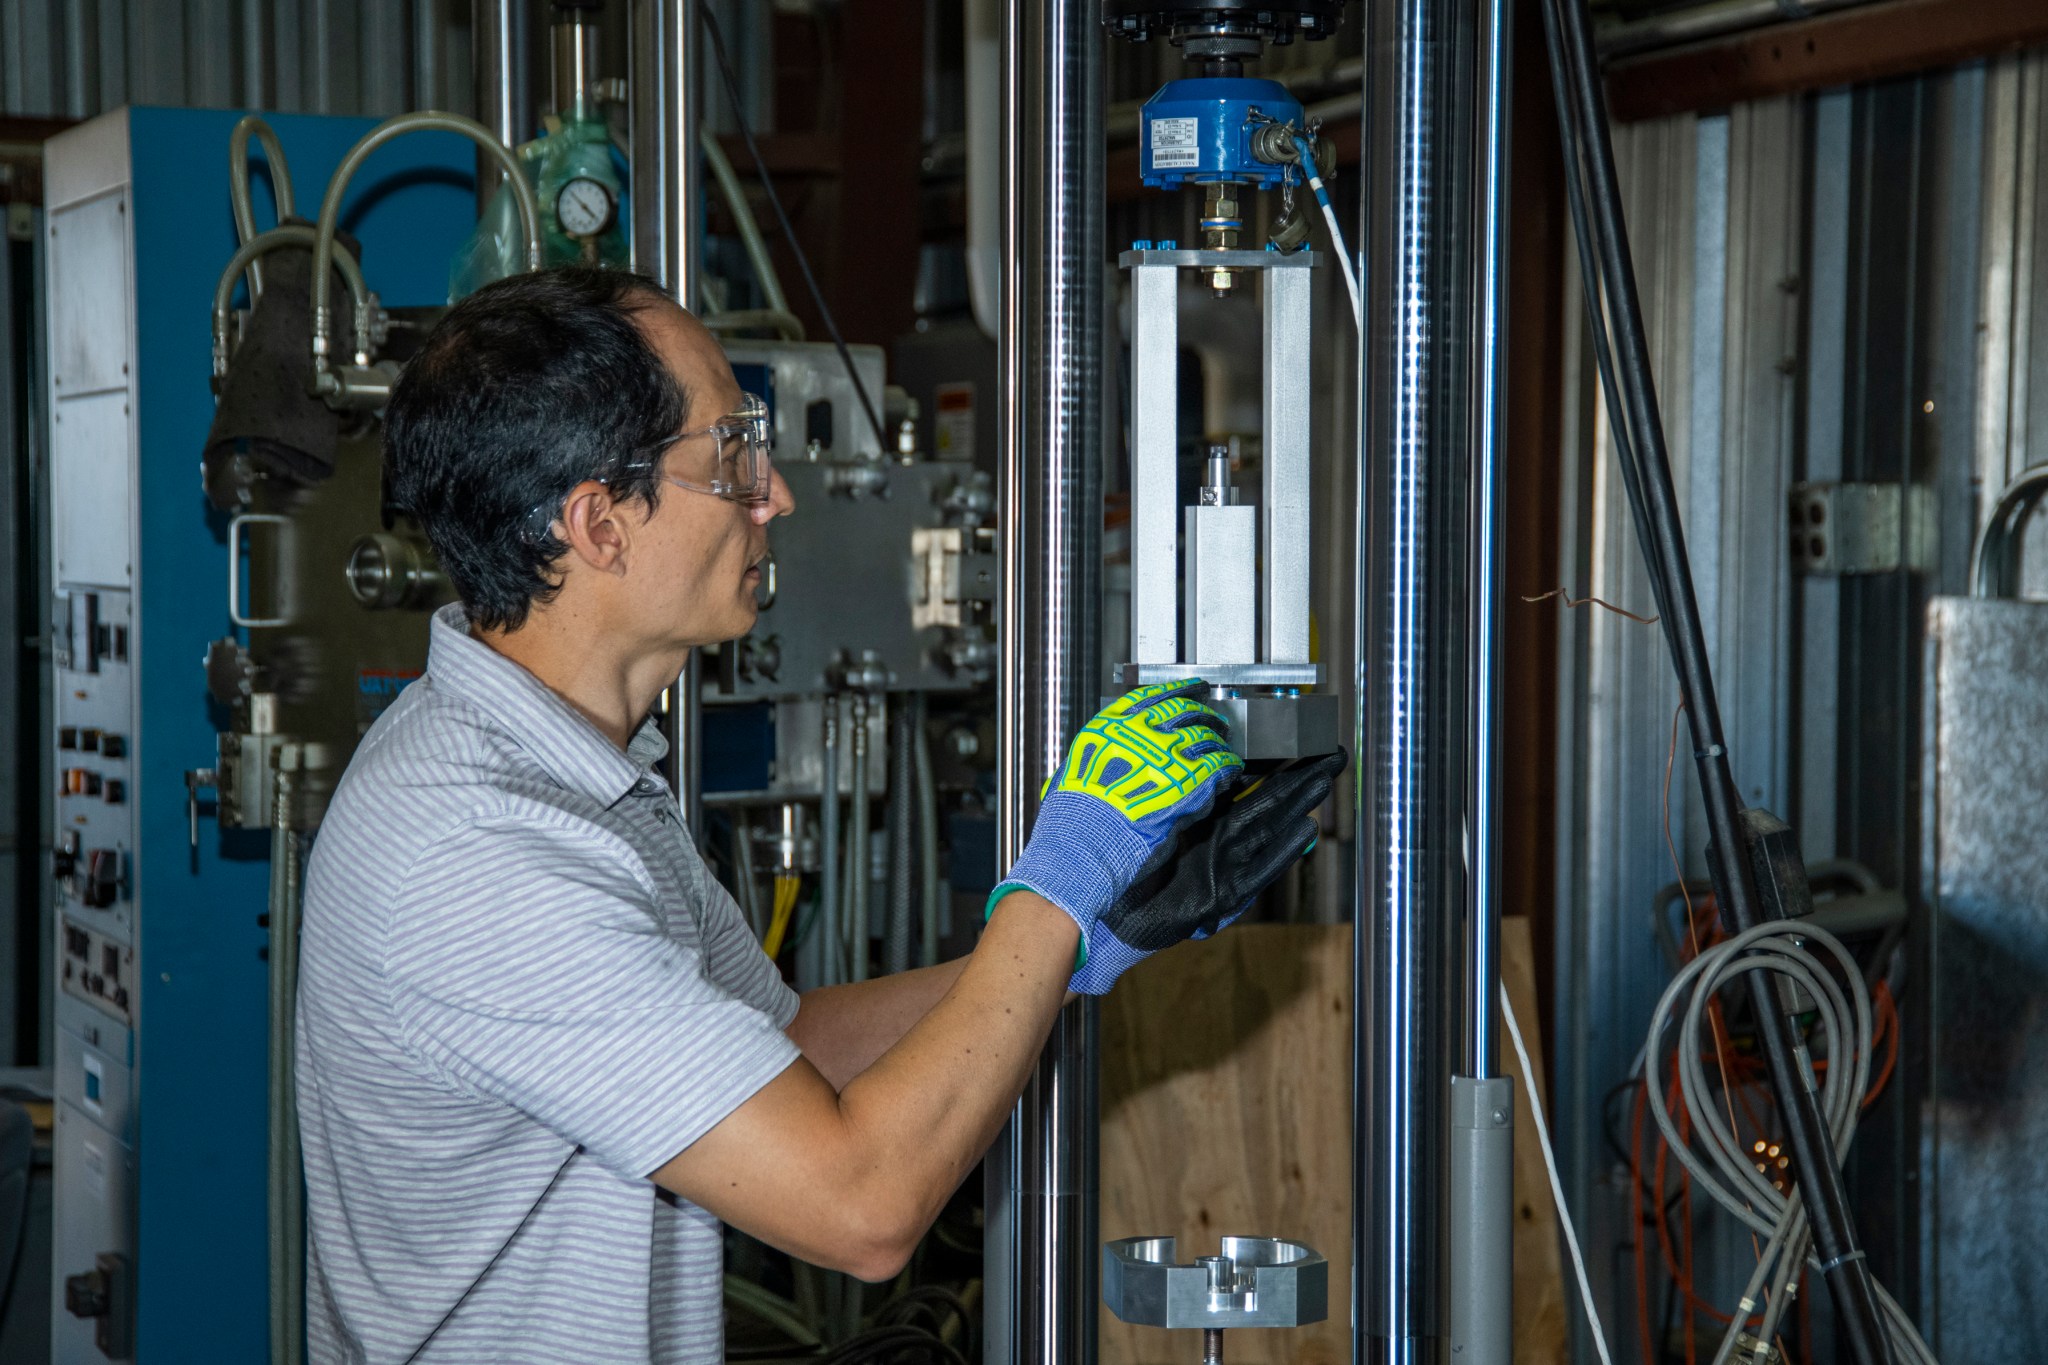 Andrew Holguin prepares an experiment to verify the strength of the magnetic forces as two mounted magnets are moved closer and closer to each other.